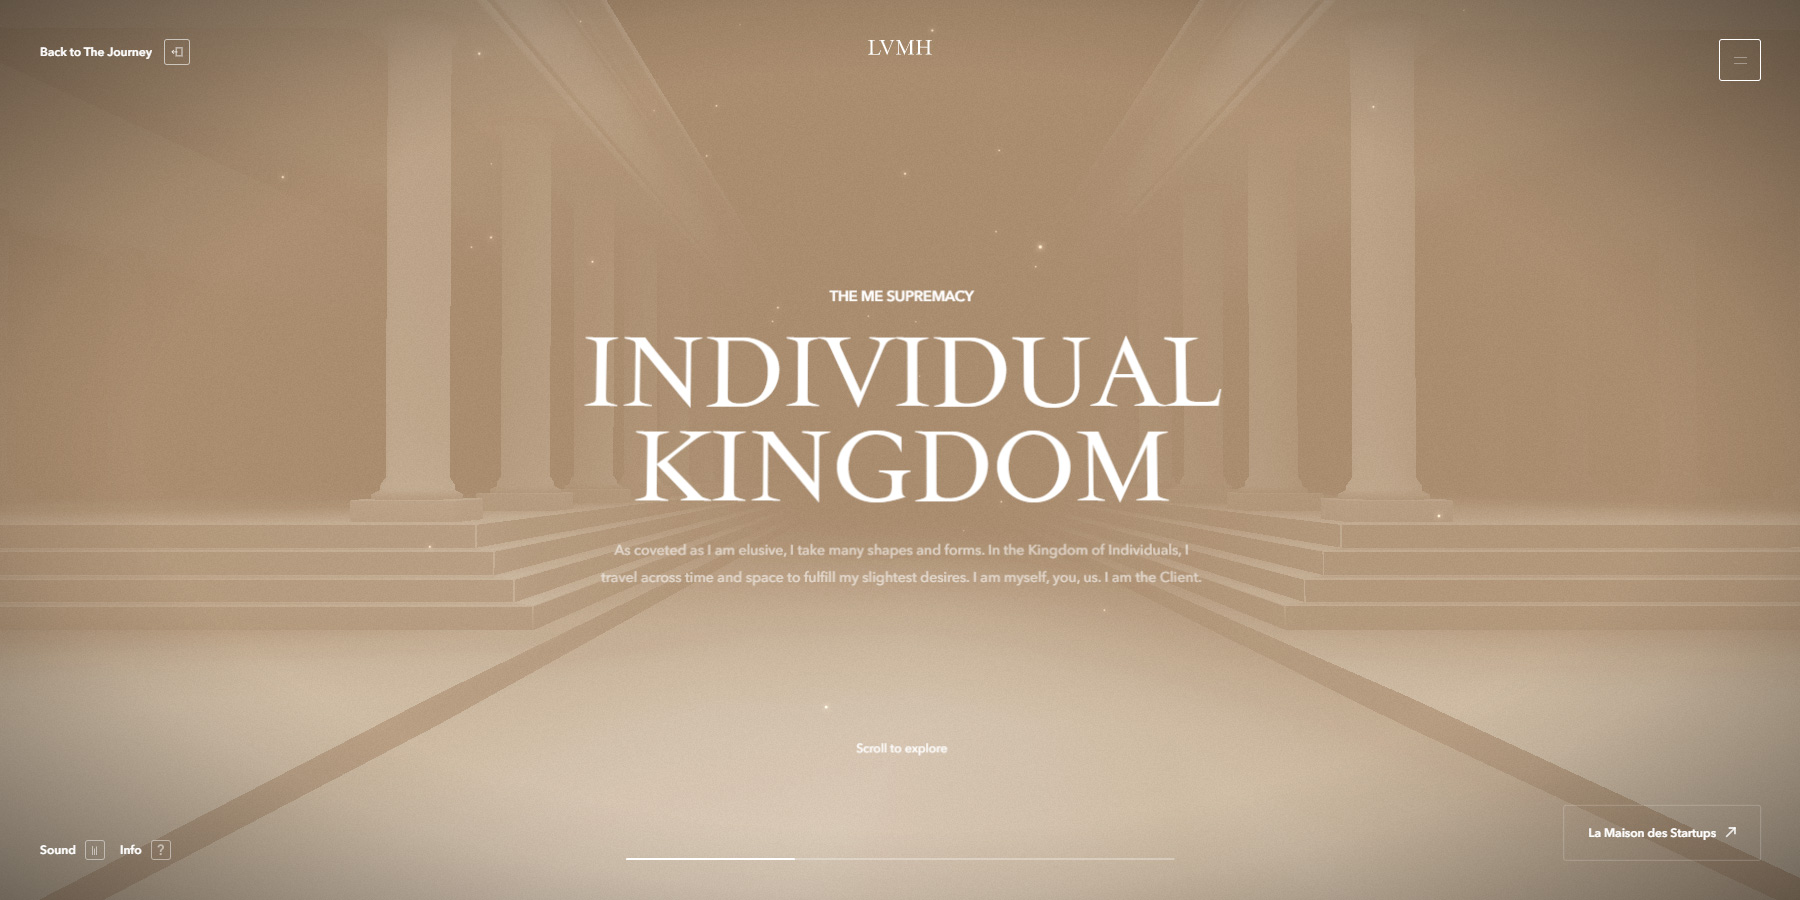 LVMH Openlands - Website of the Day